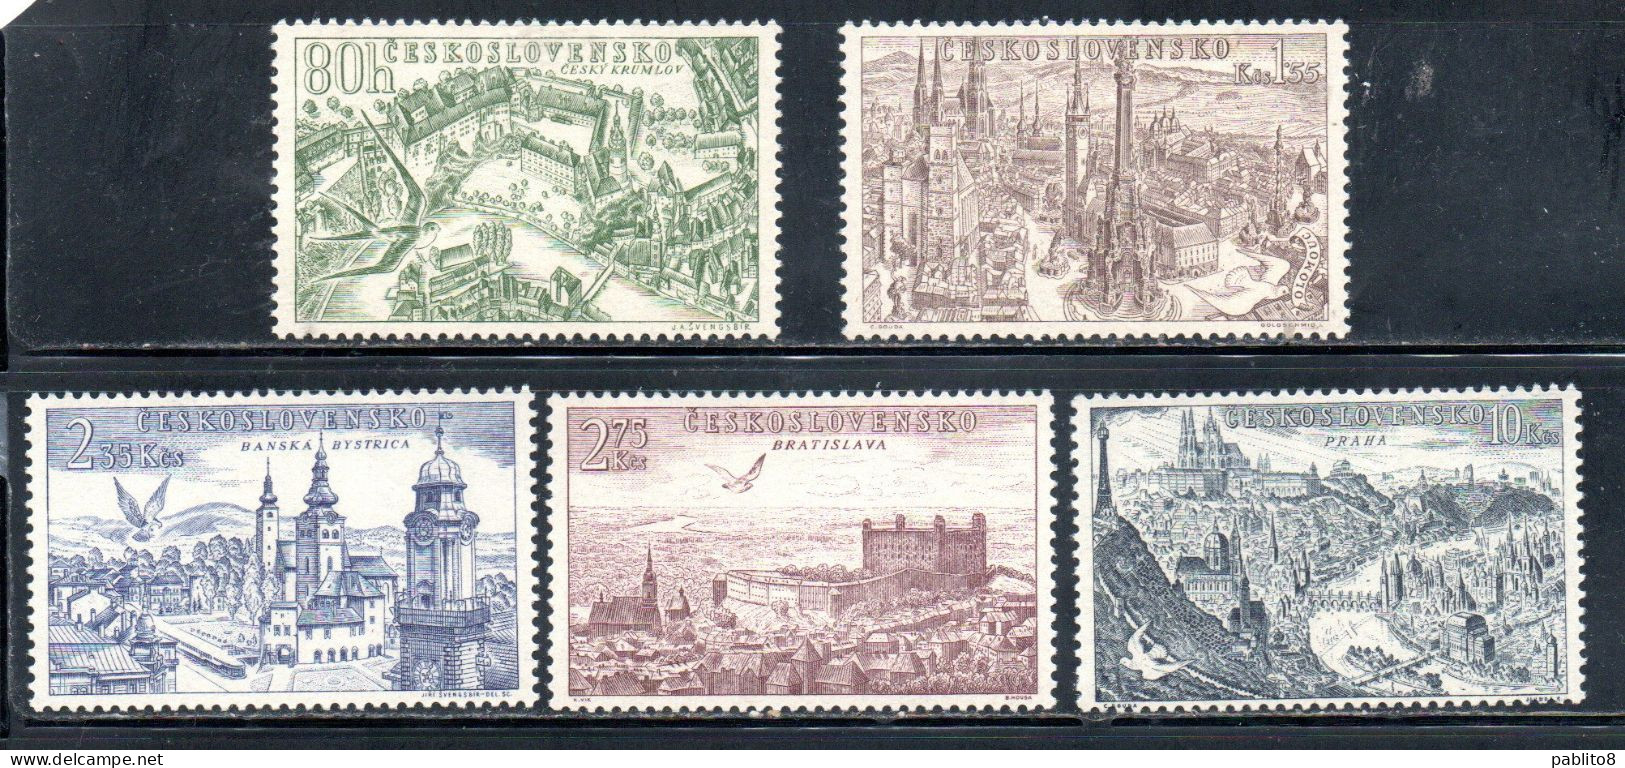 CZECHOSLOVAKIA CECOSLOVACCHIA 1955 AIR POST MAIL AIRMAIL VIEWS COMPLETE SET SERIE COMPLETA MNH - Airmail